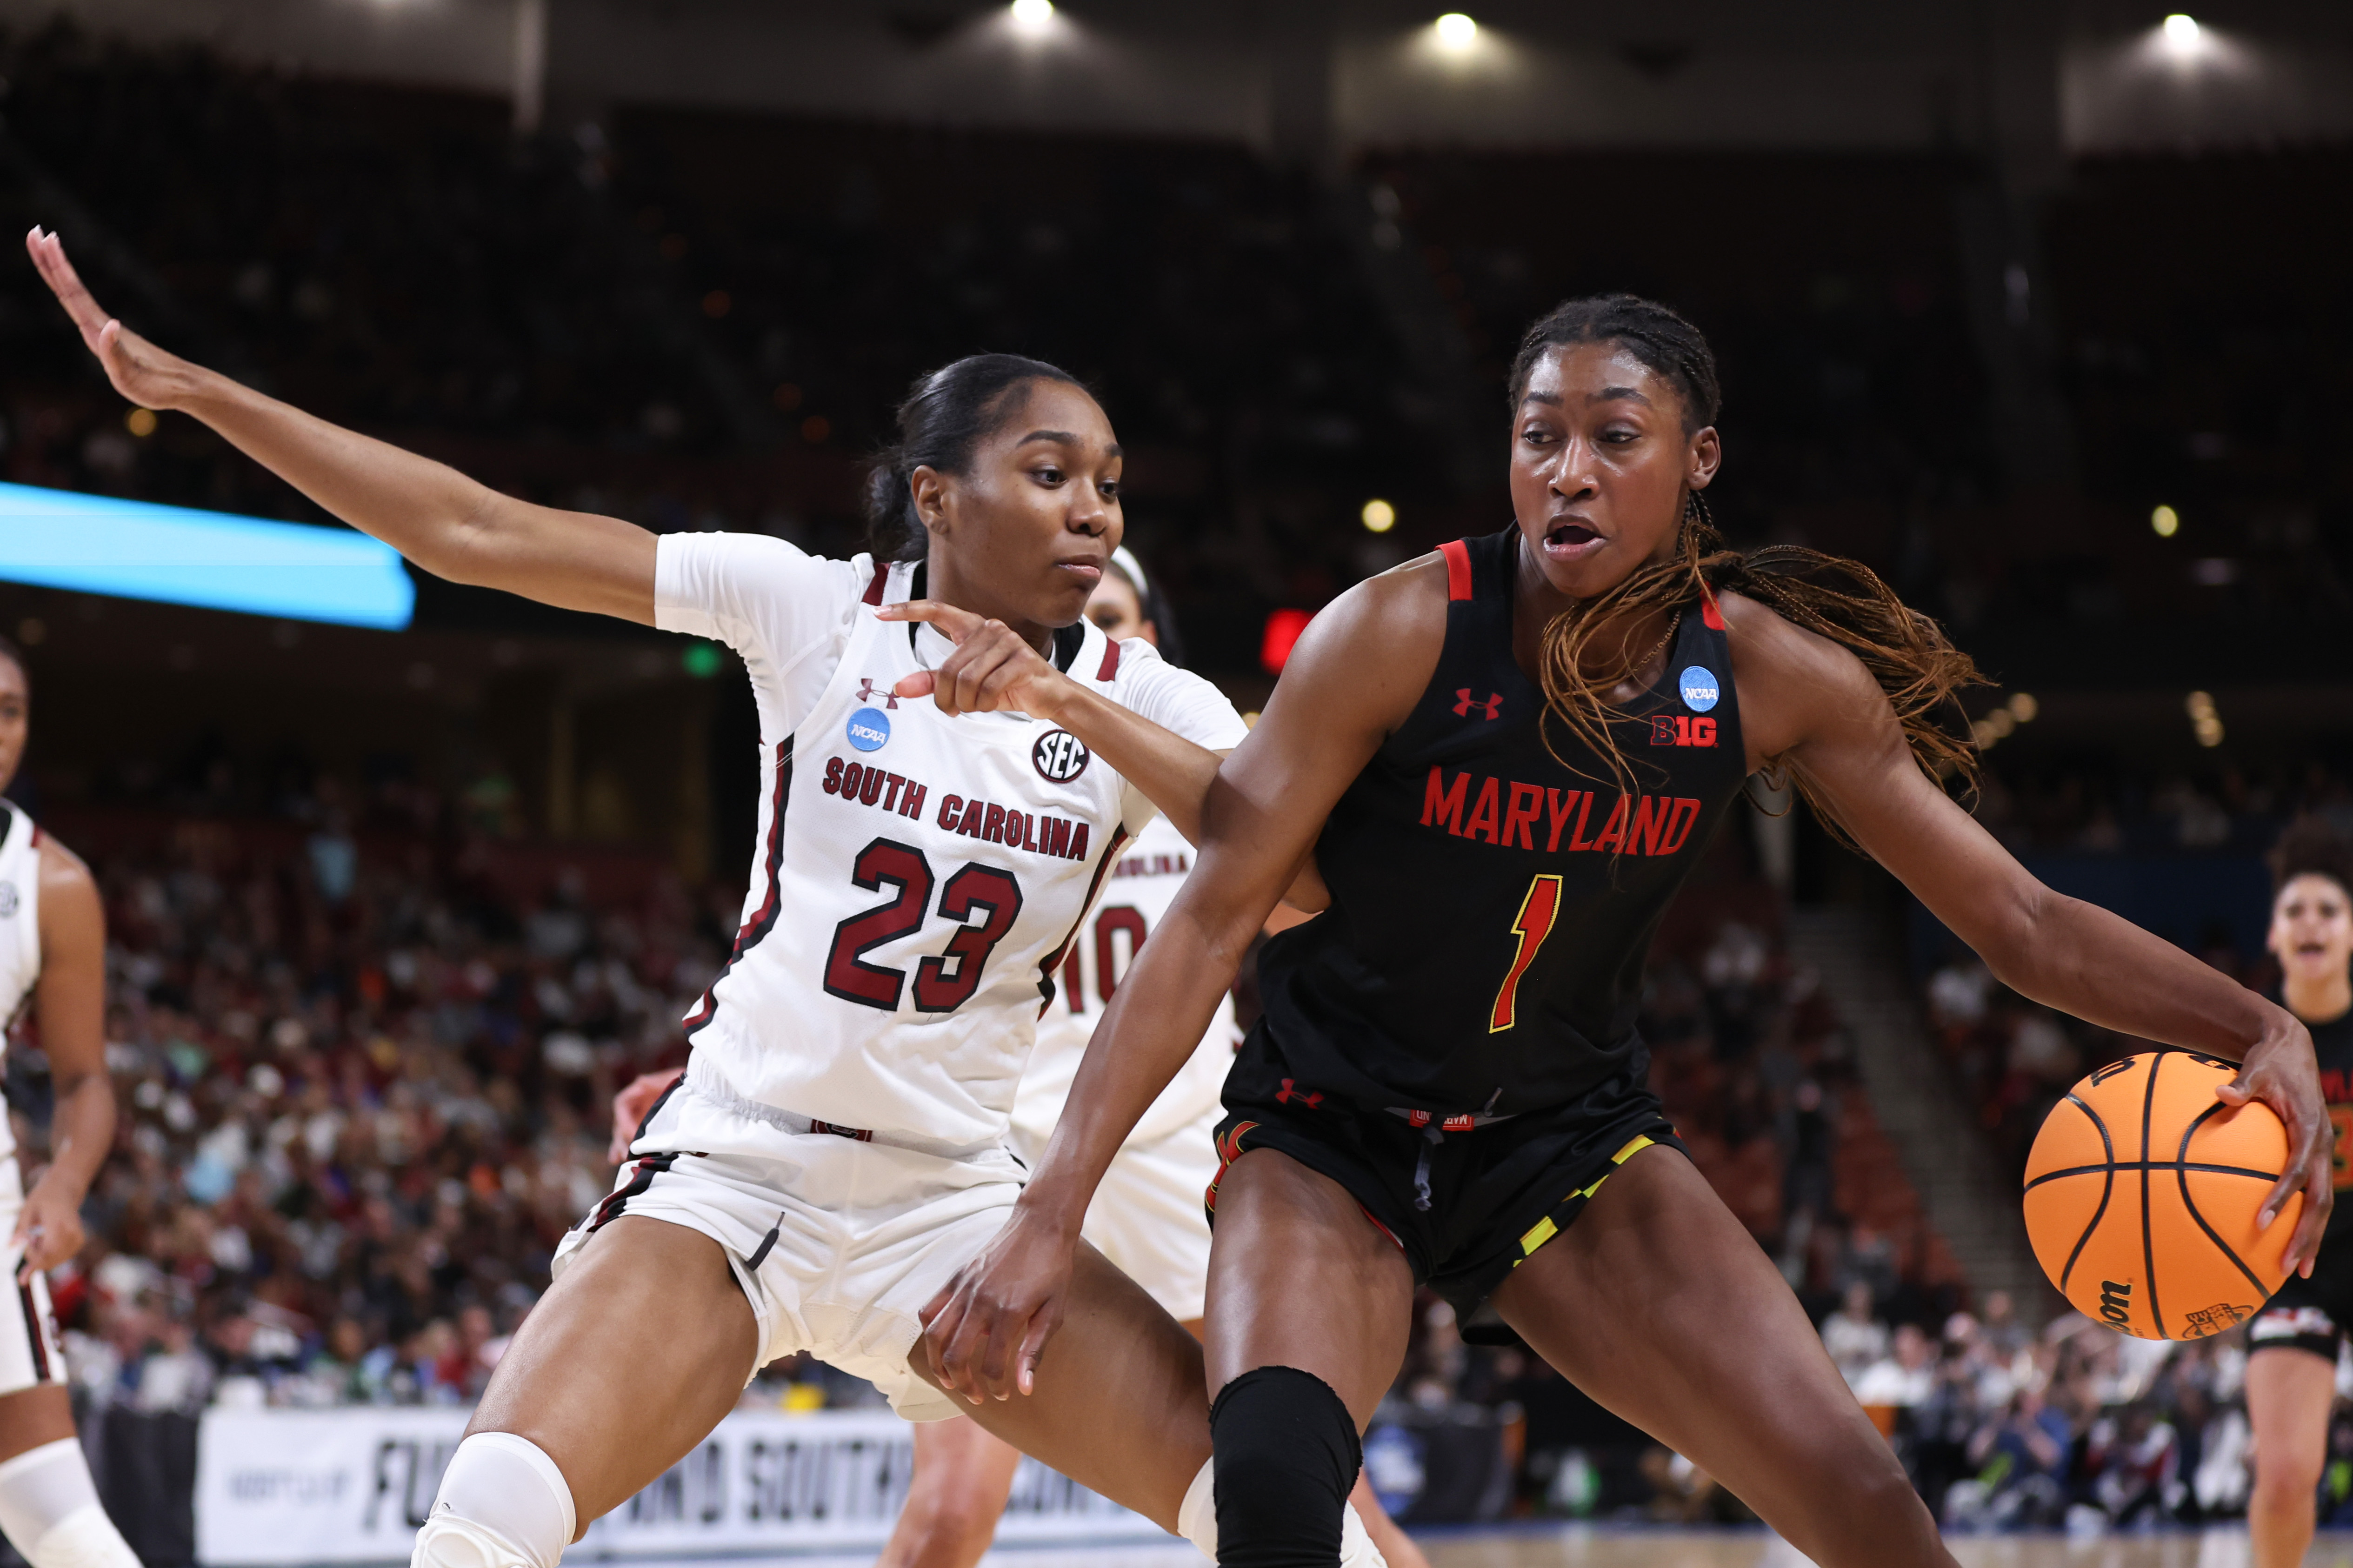 GREENVILLE, SOUTH CAROLINA - MARCH 27: Diamond Miller #1 of the Maryland Terrapins drives against Bree Hall #23 of the South Carolina Gamecocks during the third quarter in the Elite Eight round of the NCAA Women’s Basketball Tournament at Bon Secours Wellness Arena on March 27, 2023 in Greenville, South Carolina.